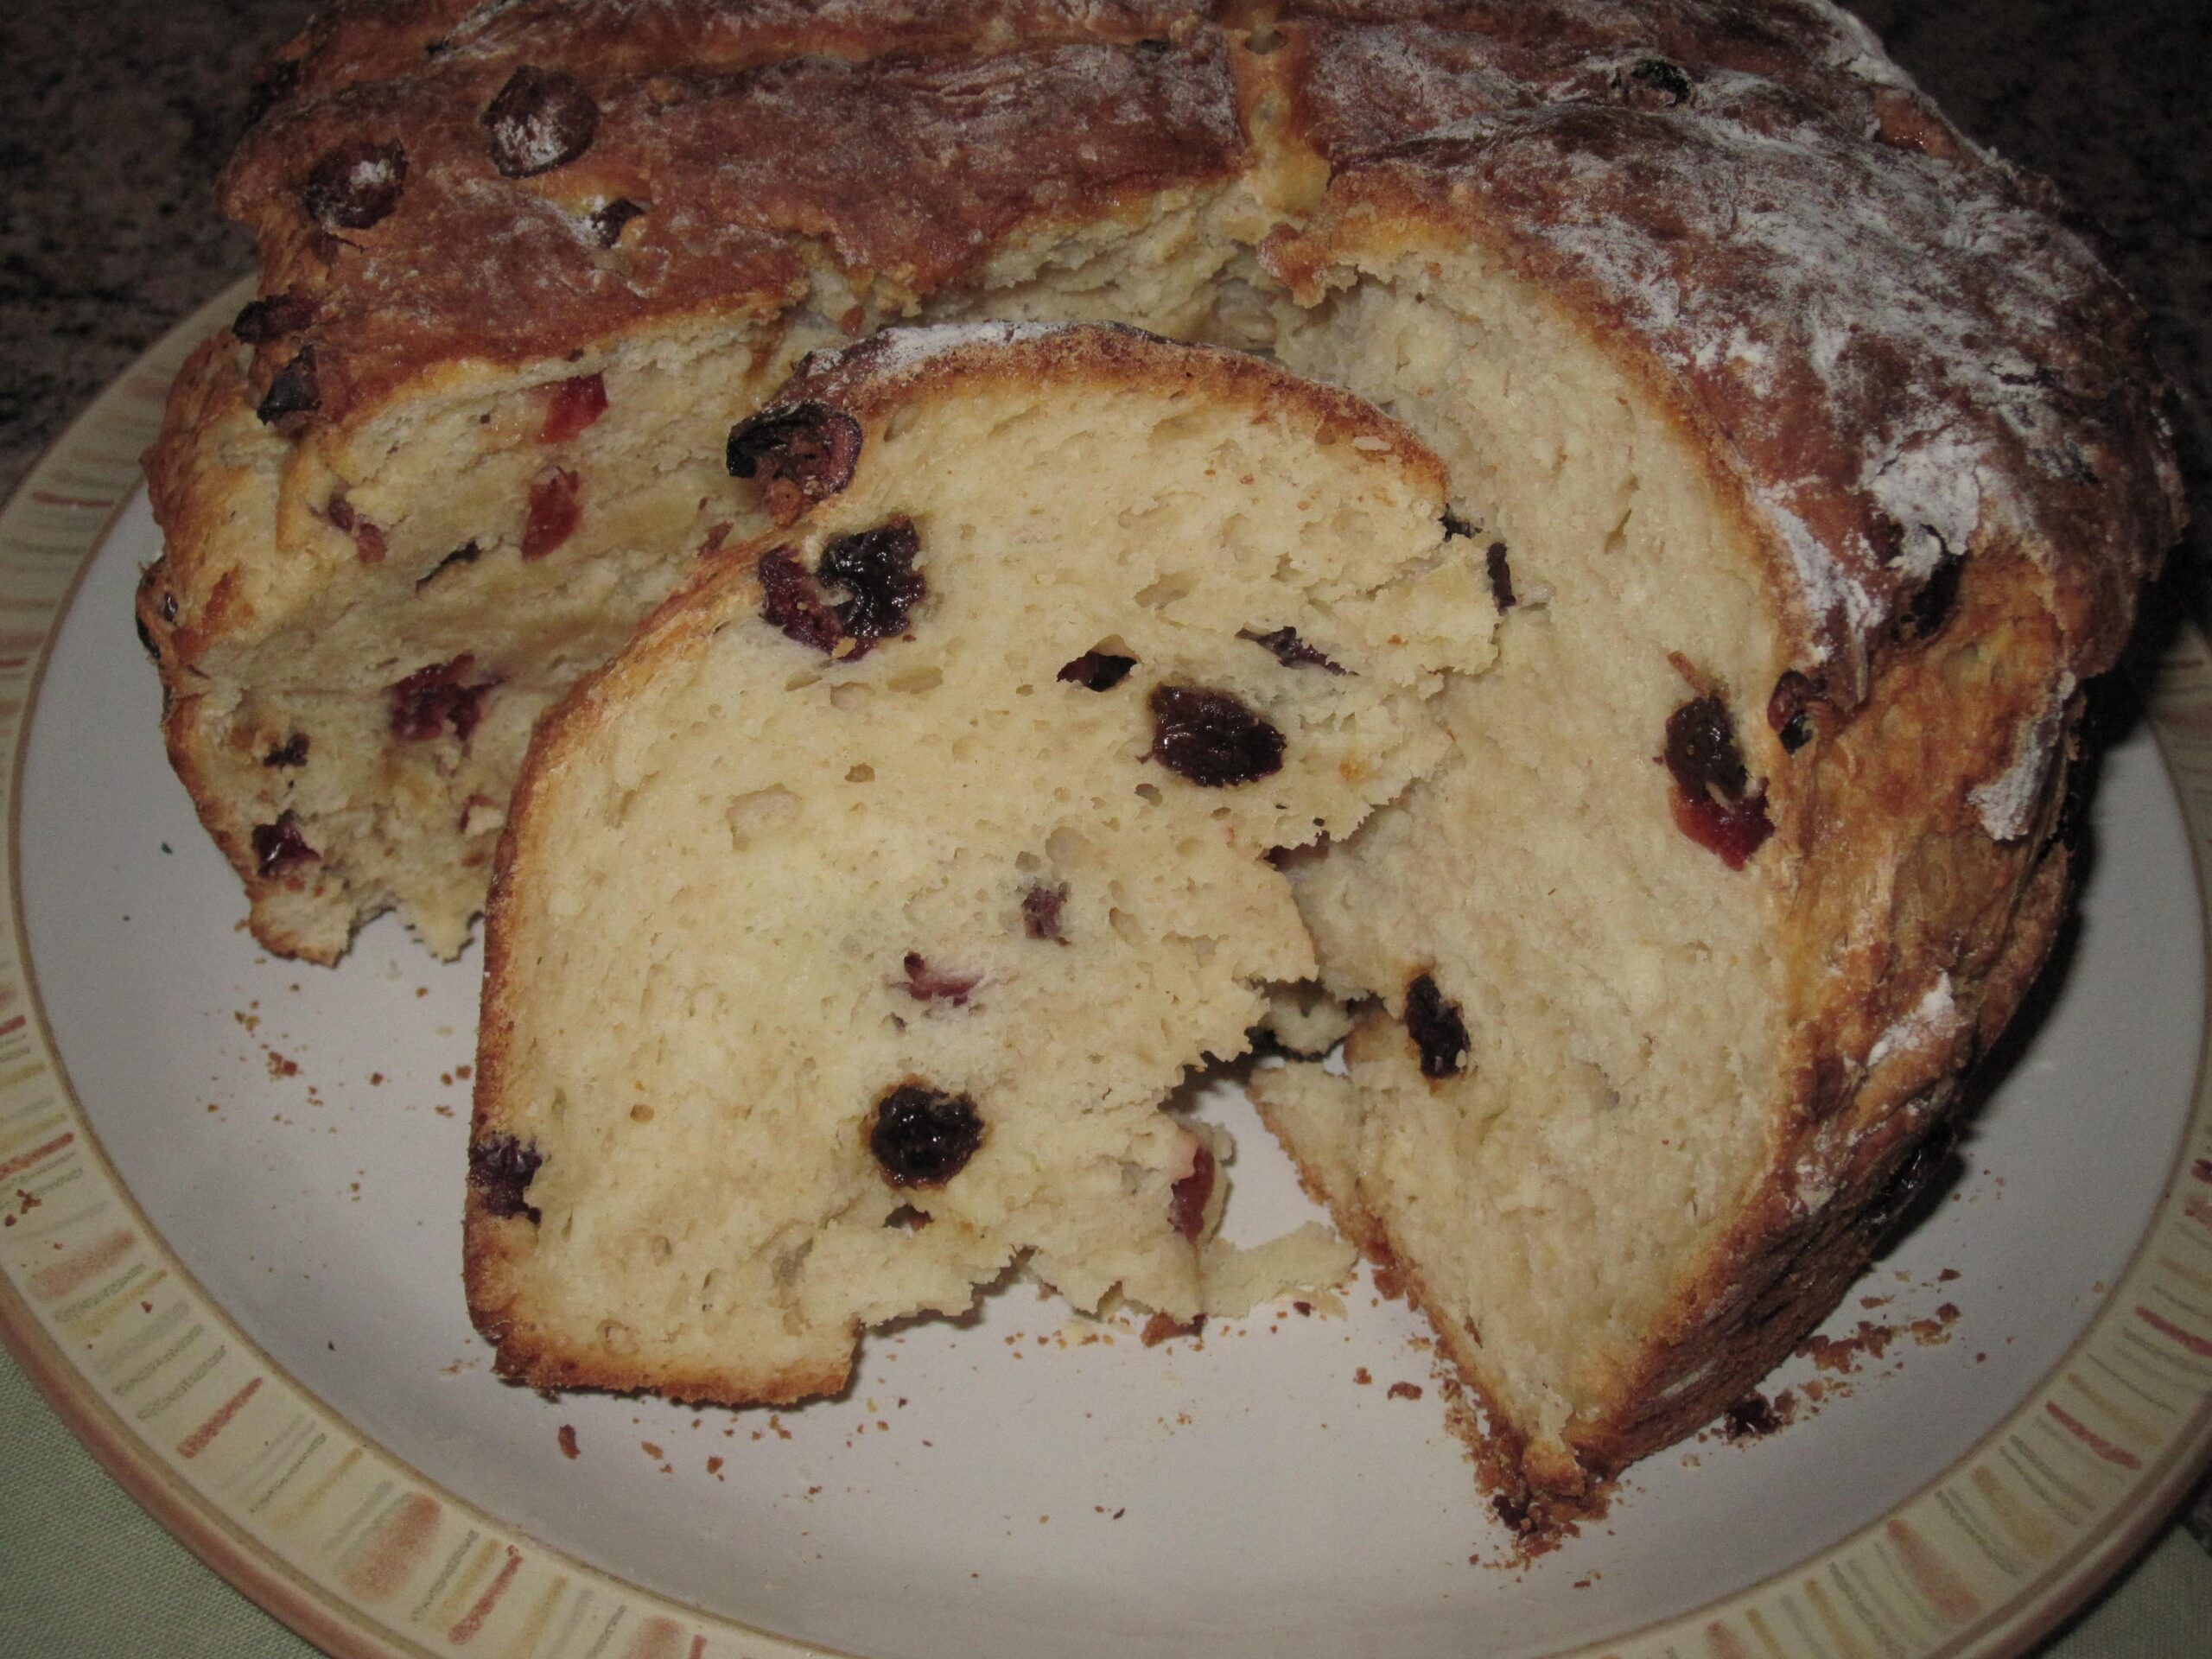  Flavorful raisins infused with whiskey take your traditional soda bread to the next level